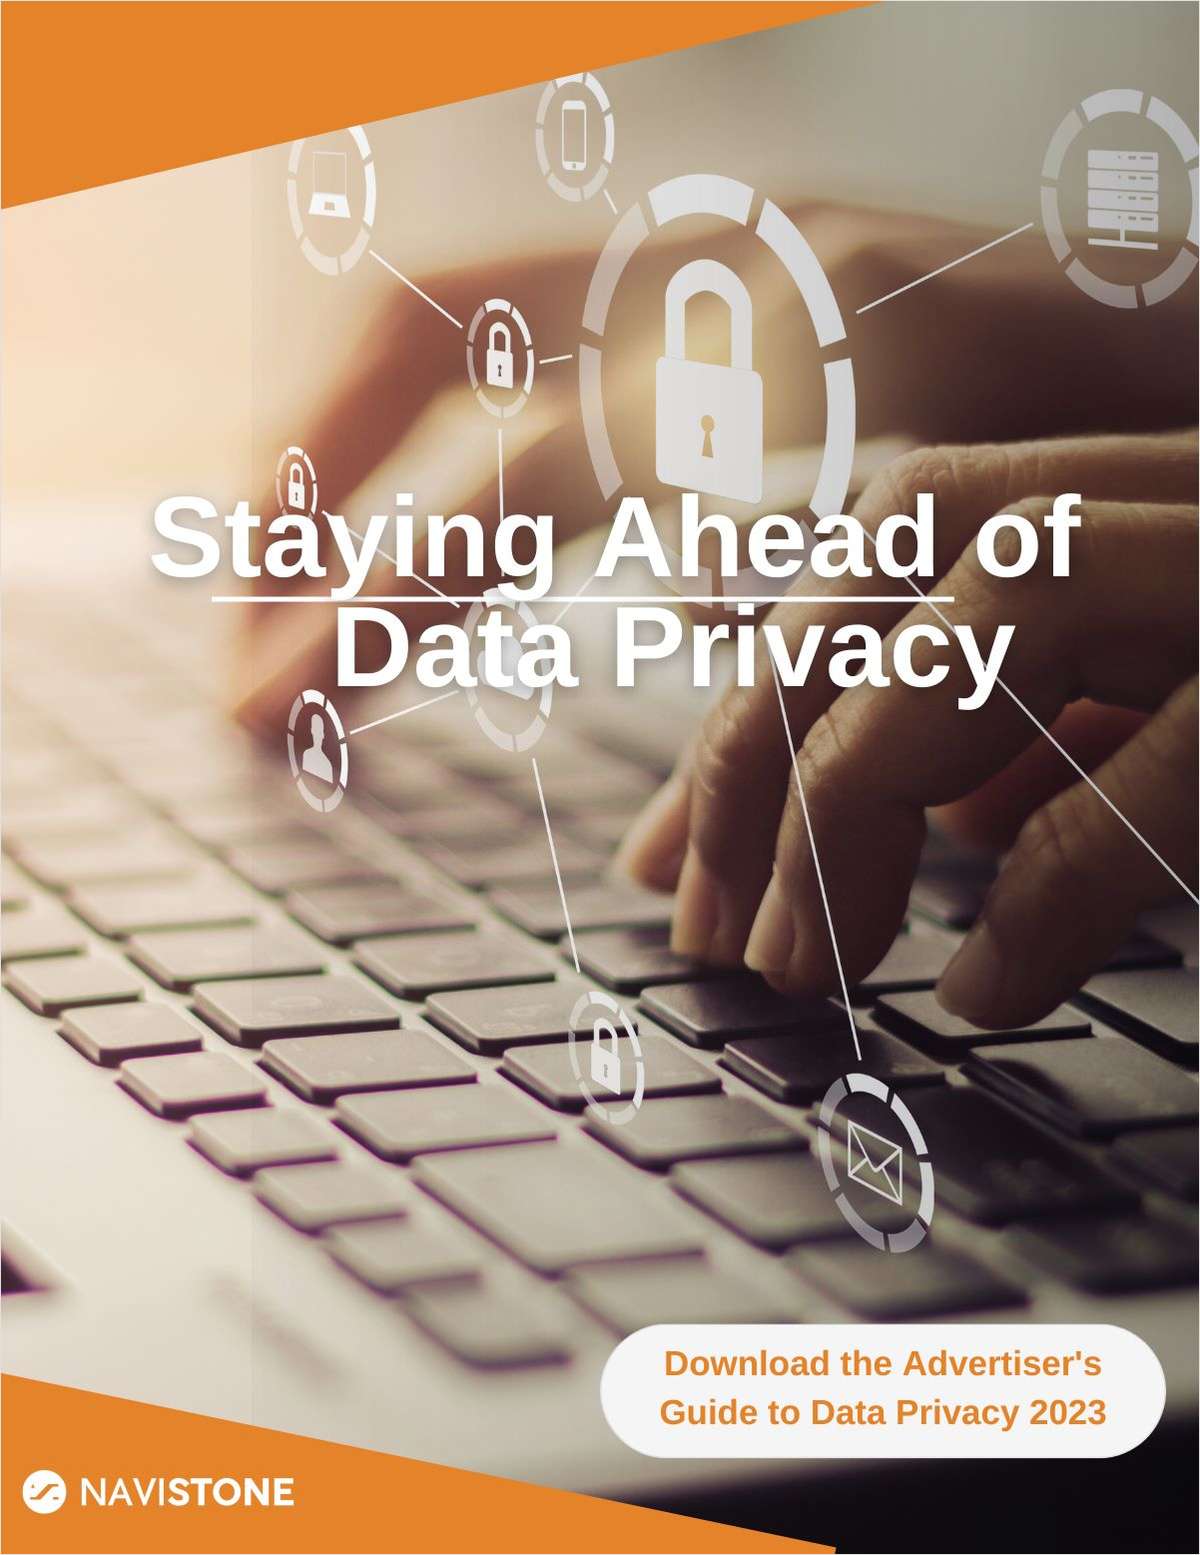 An Advertiser's Guide to Data Privacy in 2023